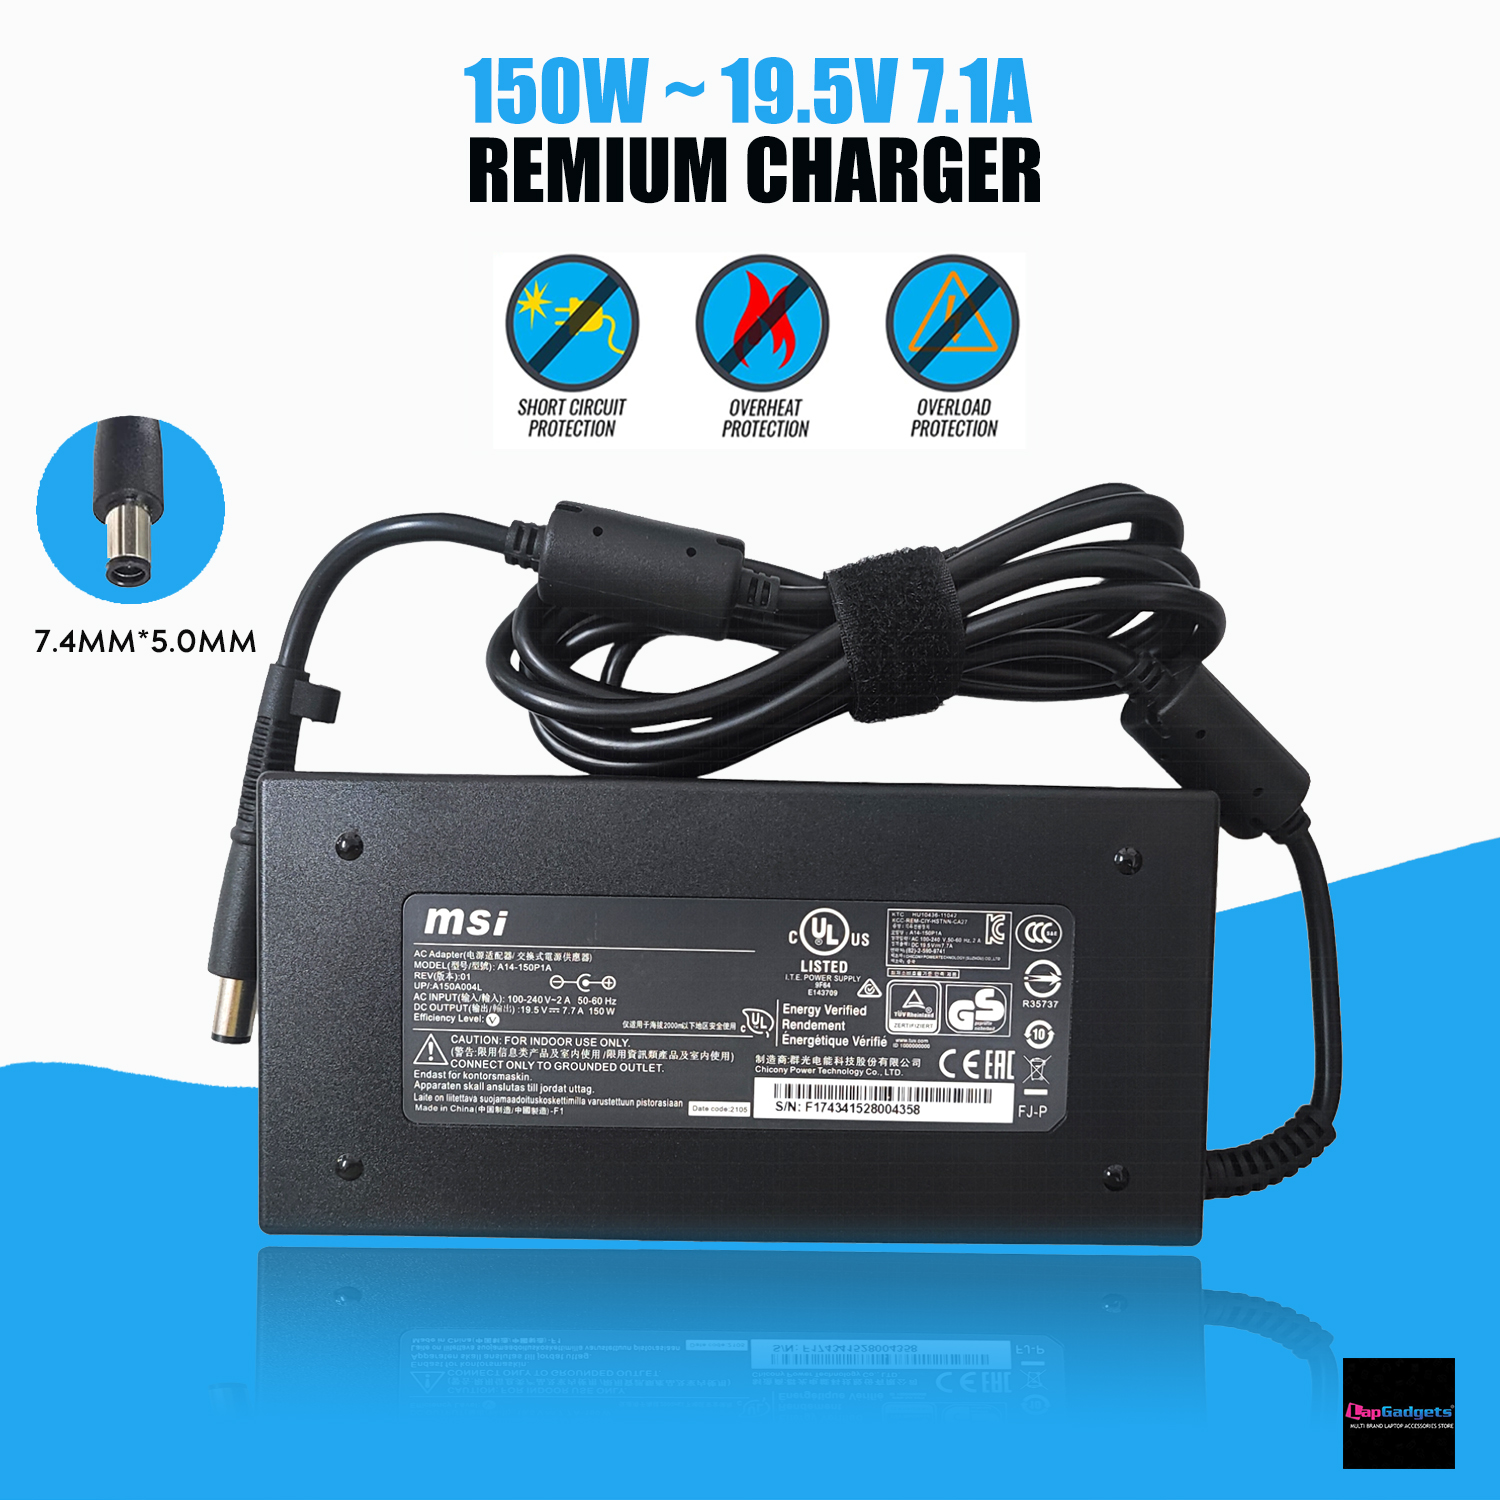 msi-150w-charger-7.4mm